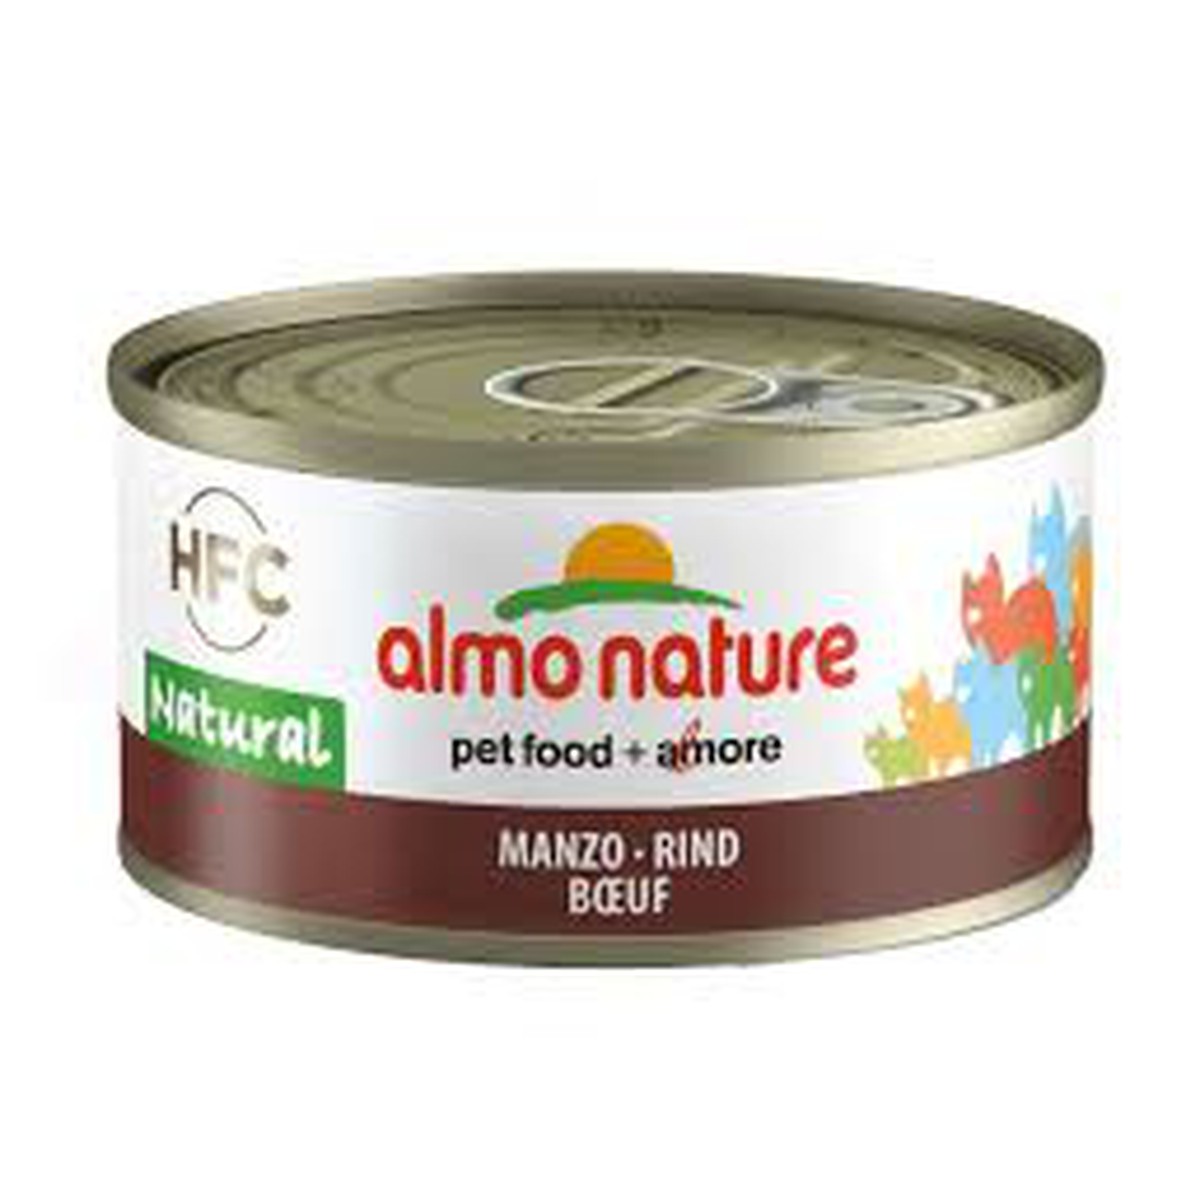 Almo nature  Almo nature  HFC CAT Natural Boeuf 70g  70 g